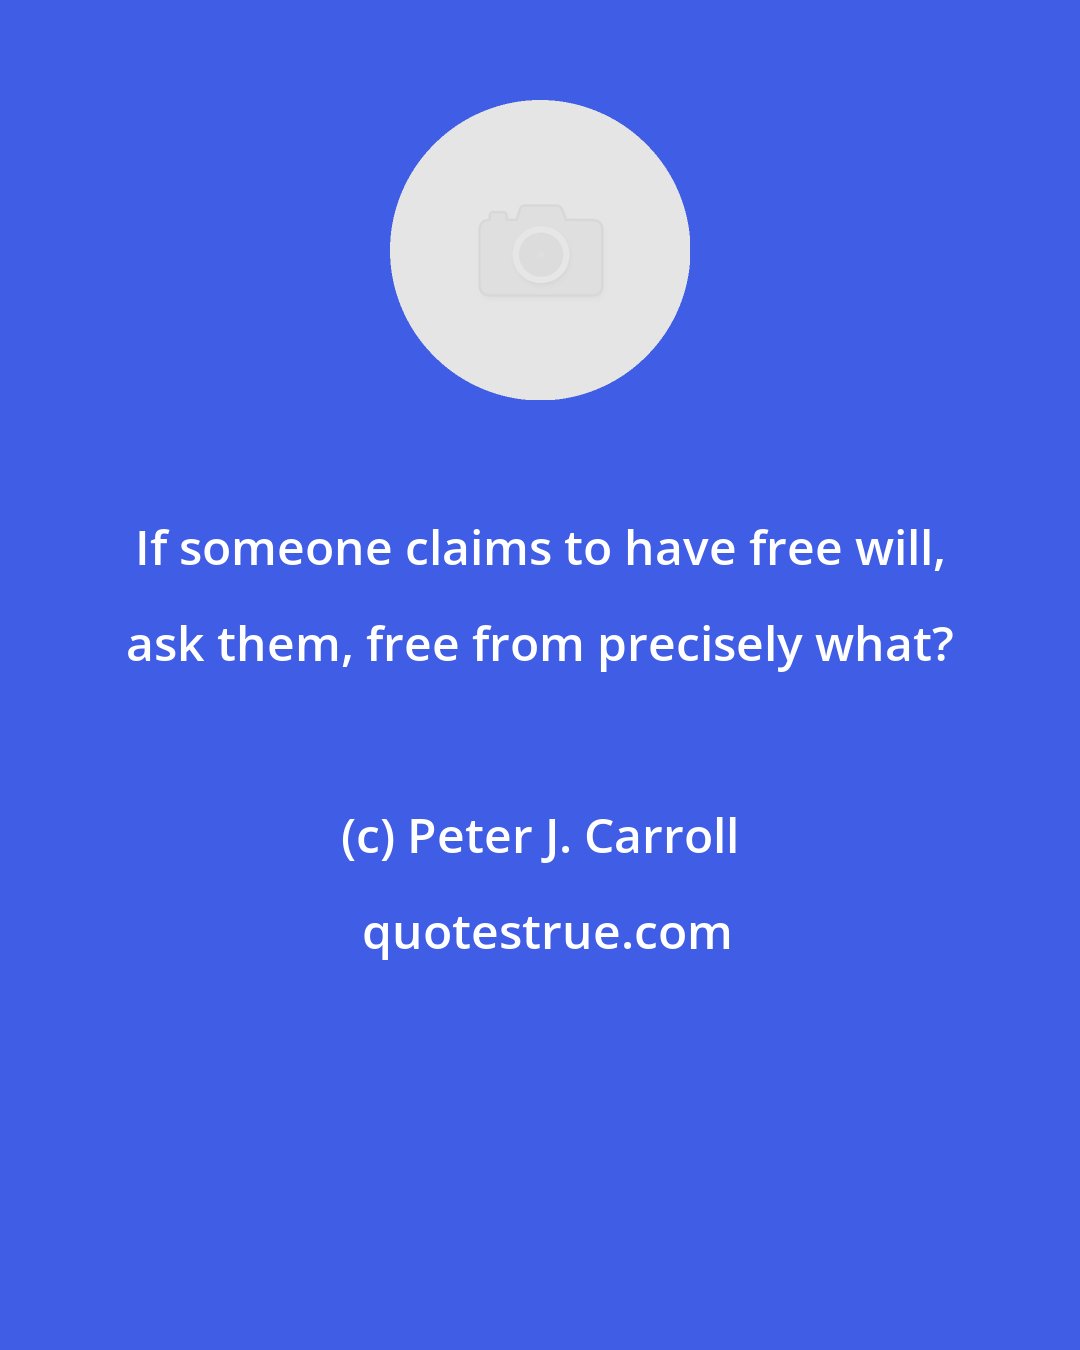 Peter J. Carroll: If someone claims to have free will, ask them, free from precisely what?